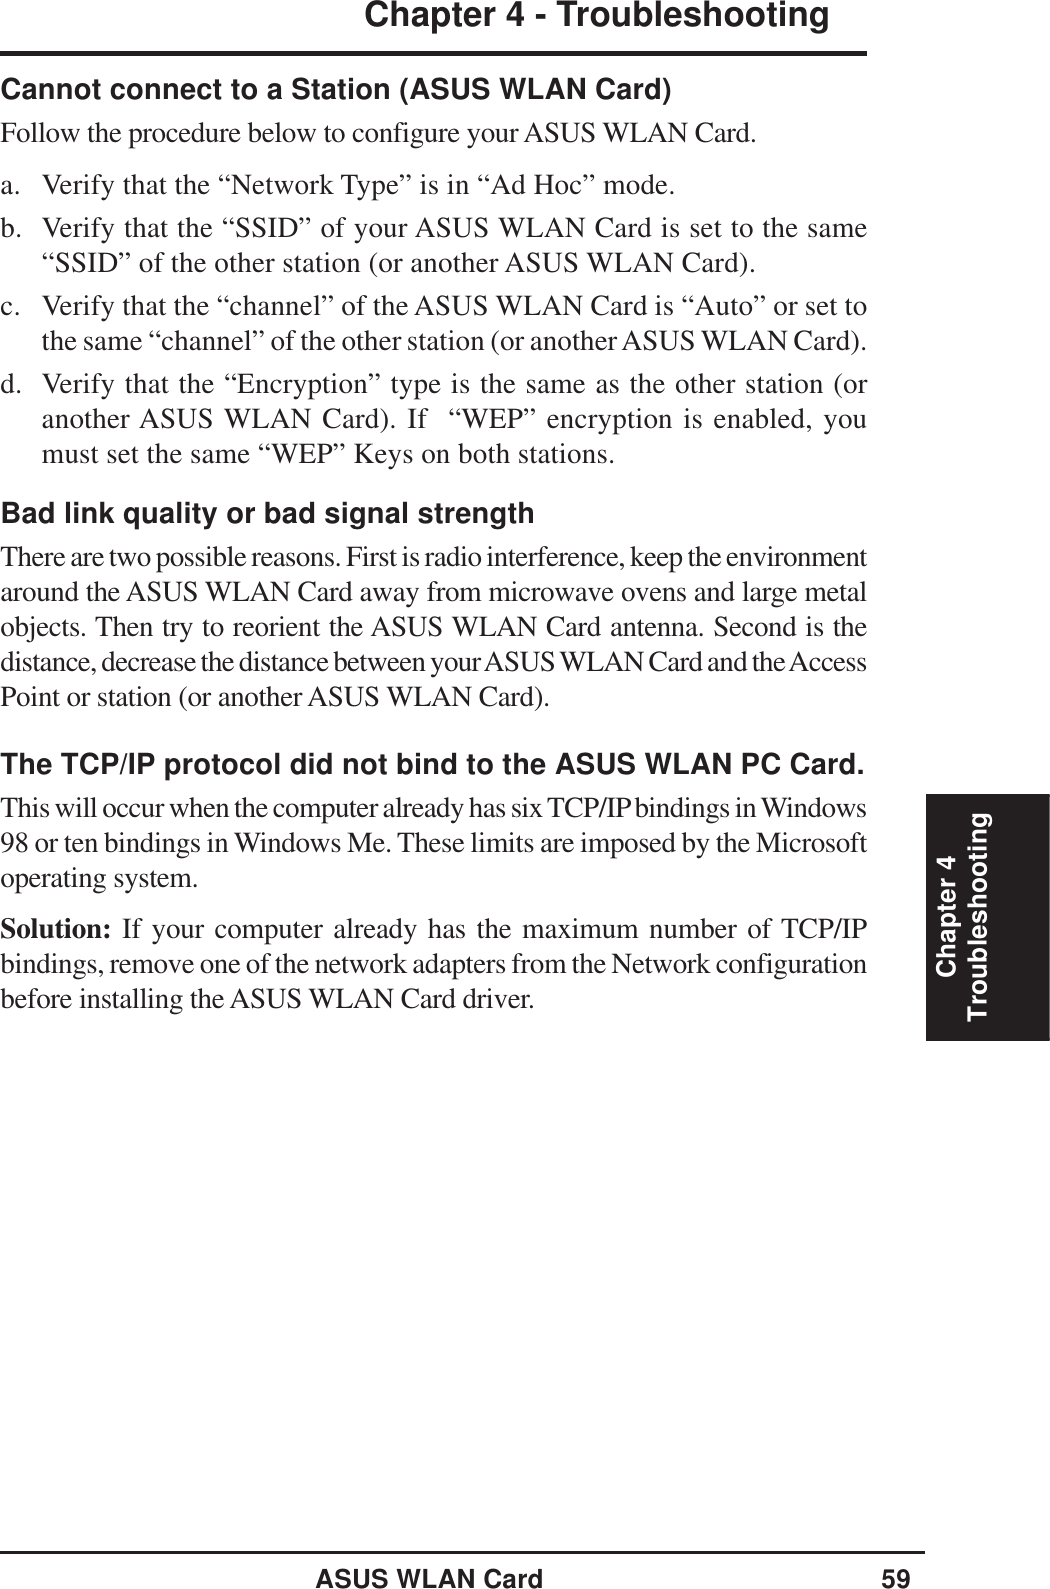 ASUS WLAN Card 59Chapter 4 - TroubleshootingChapter 4TroubleshootingCannot connect to a Station (ASUS WLAN Card)Follow the procedure below to configure your ASUS WLAN Card.a. Verify that the “Network Type” is in “Ad Hoc” mode.b. Verify that the “SSID” of your ASUS WLAN Card is set to the same“SSID” of the other station (or another ASUS WLAN Card).c. Verify that the “channel” of the ASUS WLAN Card is “Auto” or set tothe same “channel” of the other station (or another ASUS WLAN Card).d. Verify that the “Encryption” type is the same as the other station (oranother ASUS WLAN Card). If  “WEP” encryption is enabled, youmust set the same “WEP” Keys on both stations.Bad link quality or bad signal strengthThere are two possible reasons. First is radio interference, keep the environmentaround the ASUS WLAN Card away from microwave ovens and large metalobjects. Then try to reorient the ASUS WLAN Card antenna. Second is thedistance, decrease the distance between your ASUS WLAN Card and the AccessPoint or station (or another ASUS WLAN Card).The TCP/IP protocol did not bind to the ASUS WLAN PC Card.This will occur when the computer already has six TCP/IP bindings in Windows98 or ten bindings in Windows Me. These limits are imposed by the Microsoftoperating system.Solution: If your computer already has the maximum number of TCP/IPbindings, remove one of the network adapters from the Network configurationbefore installing the ASUS WLAN Card driver.